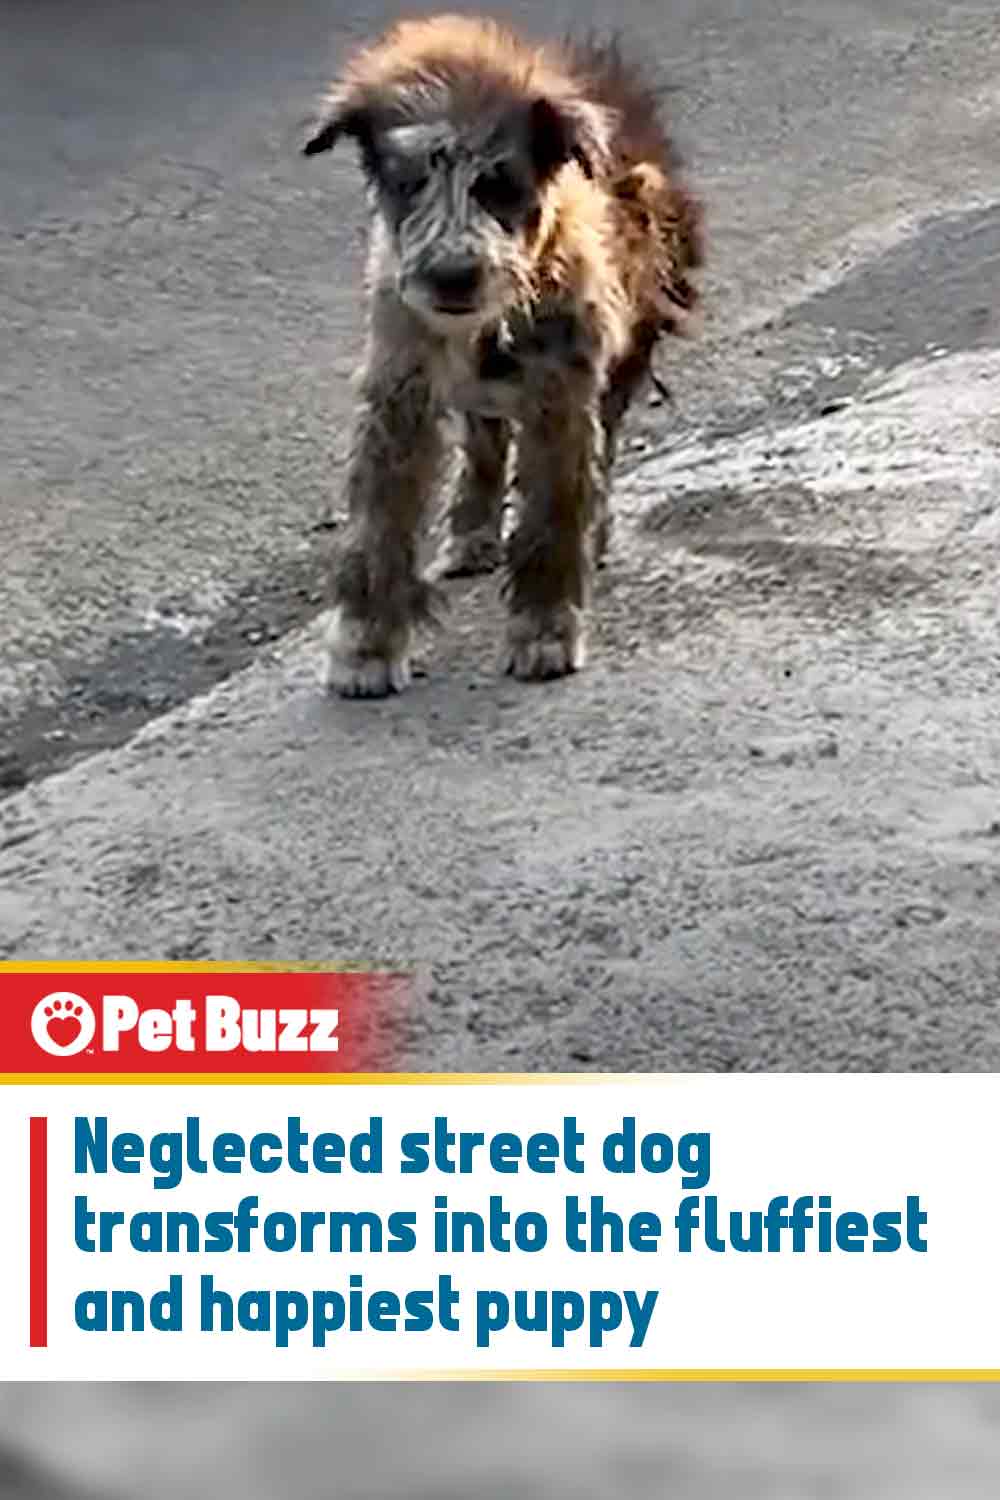 Neglected street dog transforms into the fluffiest and happiest puppy